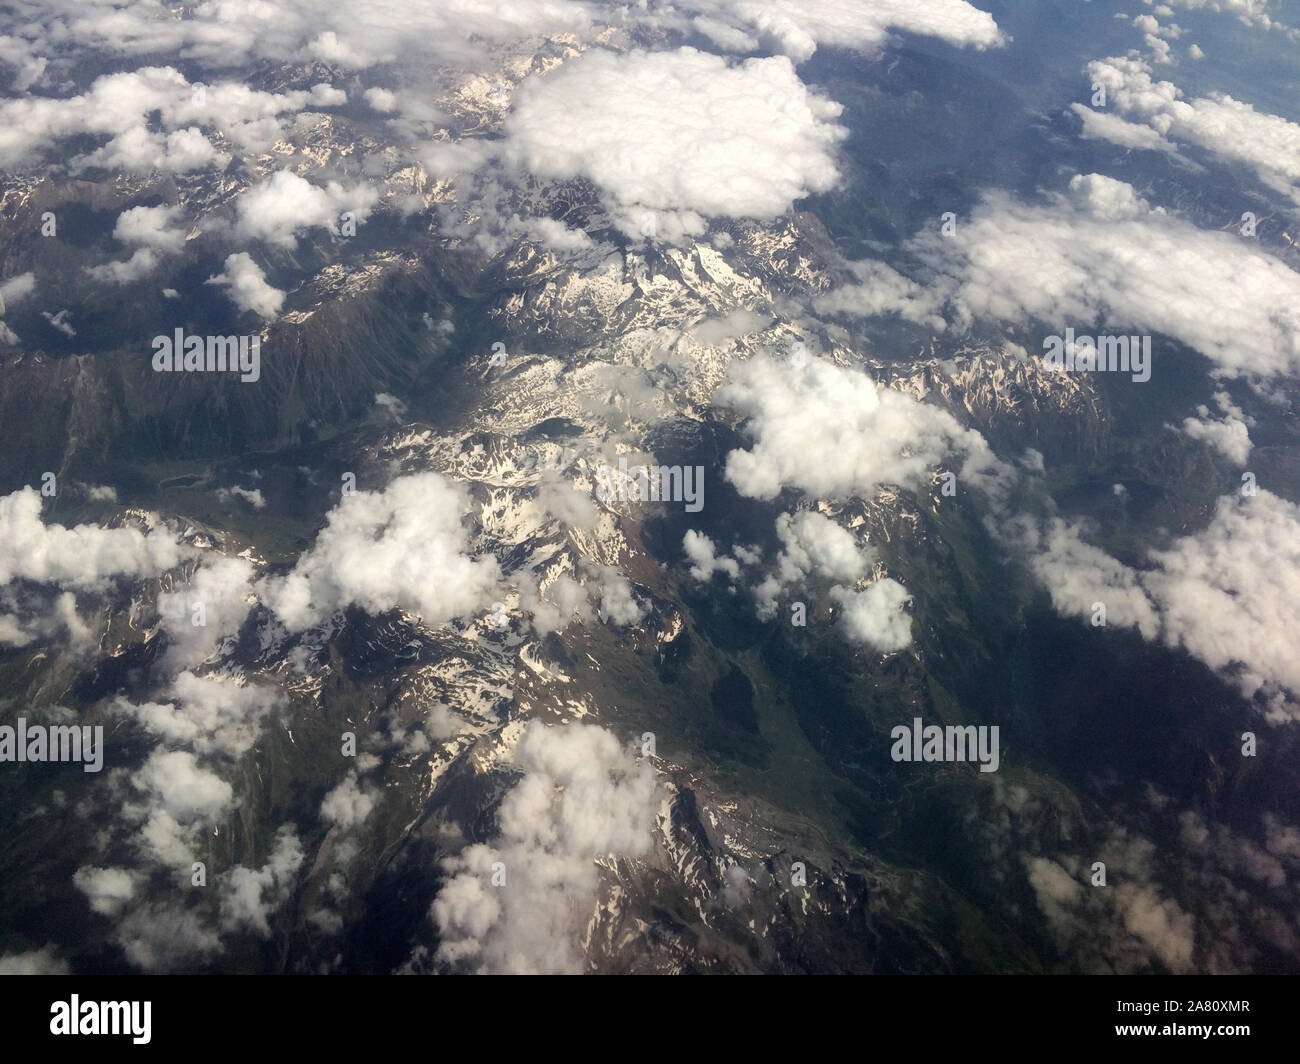 Aerial view of the Pyrenees Mountains on the border between France and Spain pictured from an aircraft. Stock Photo